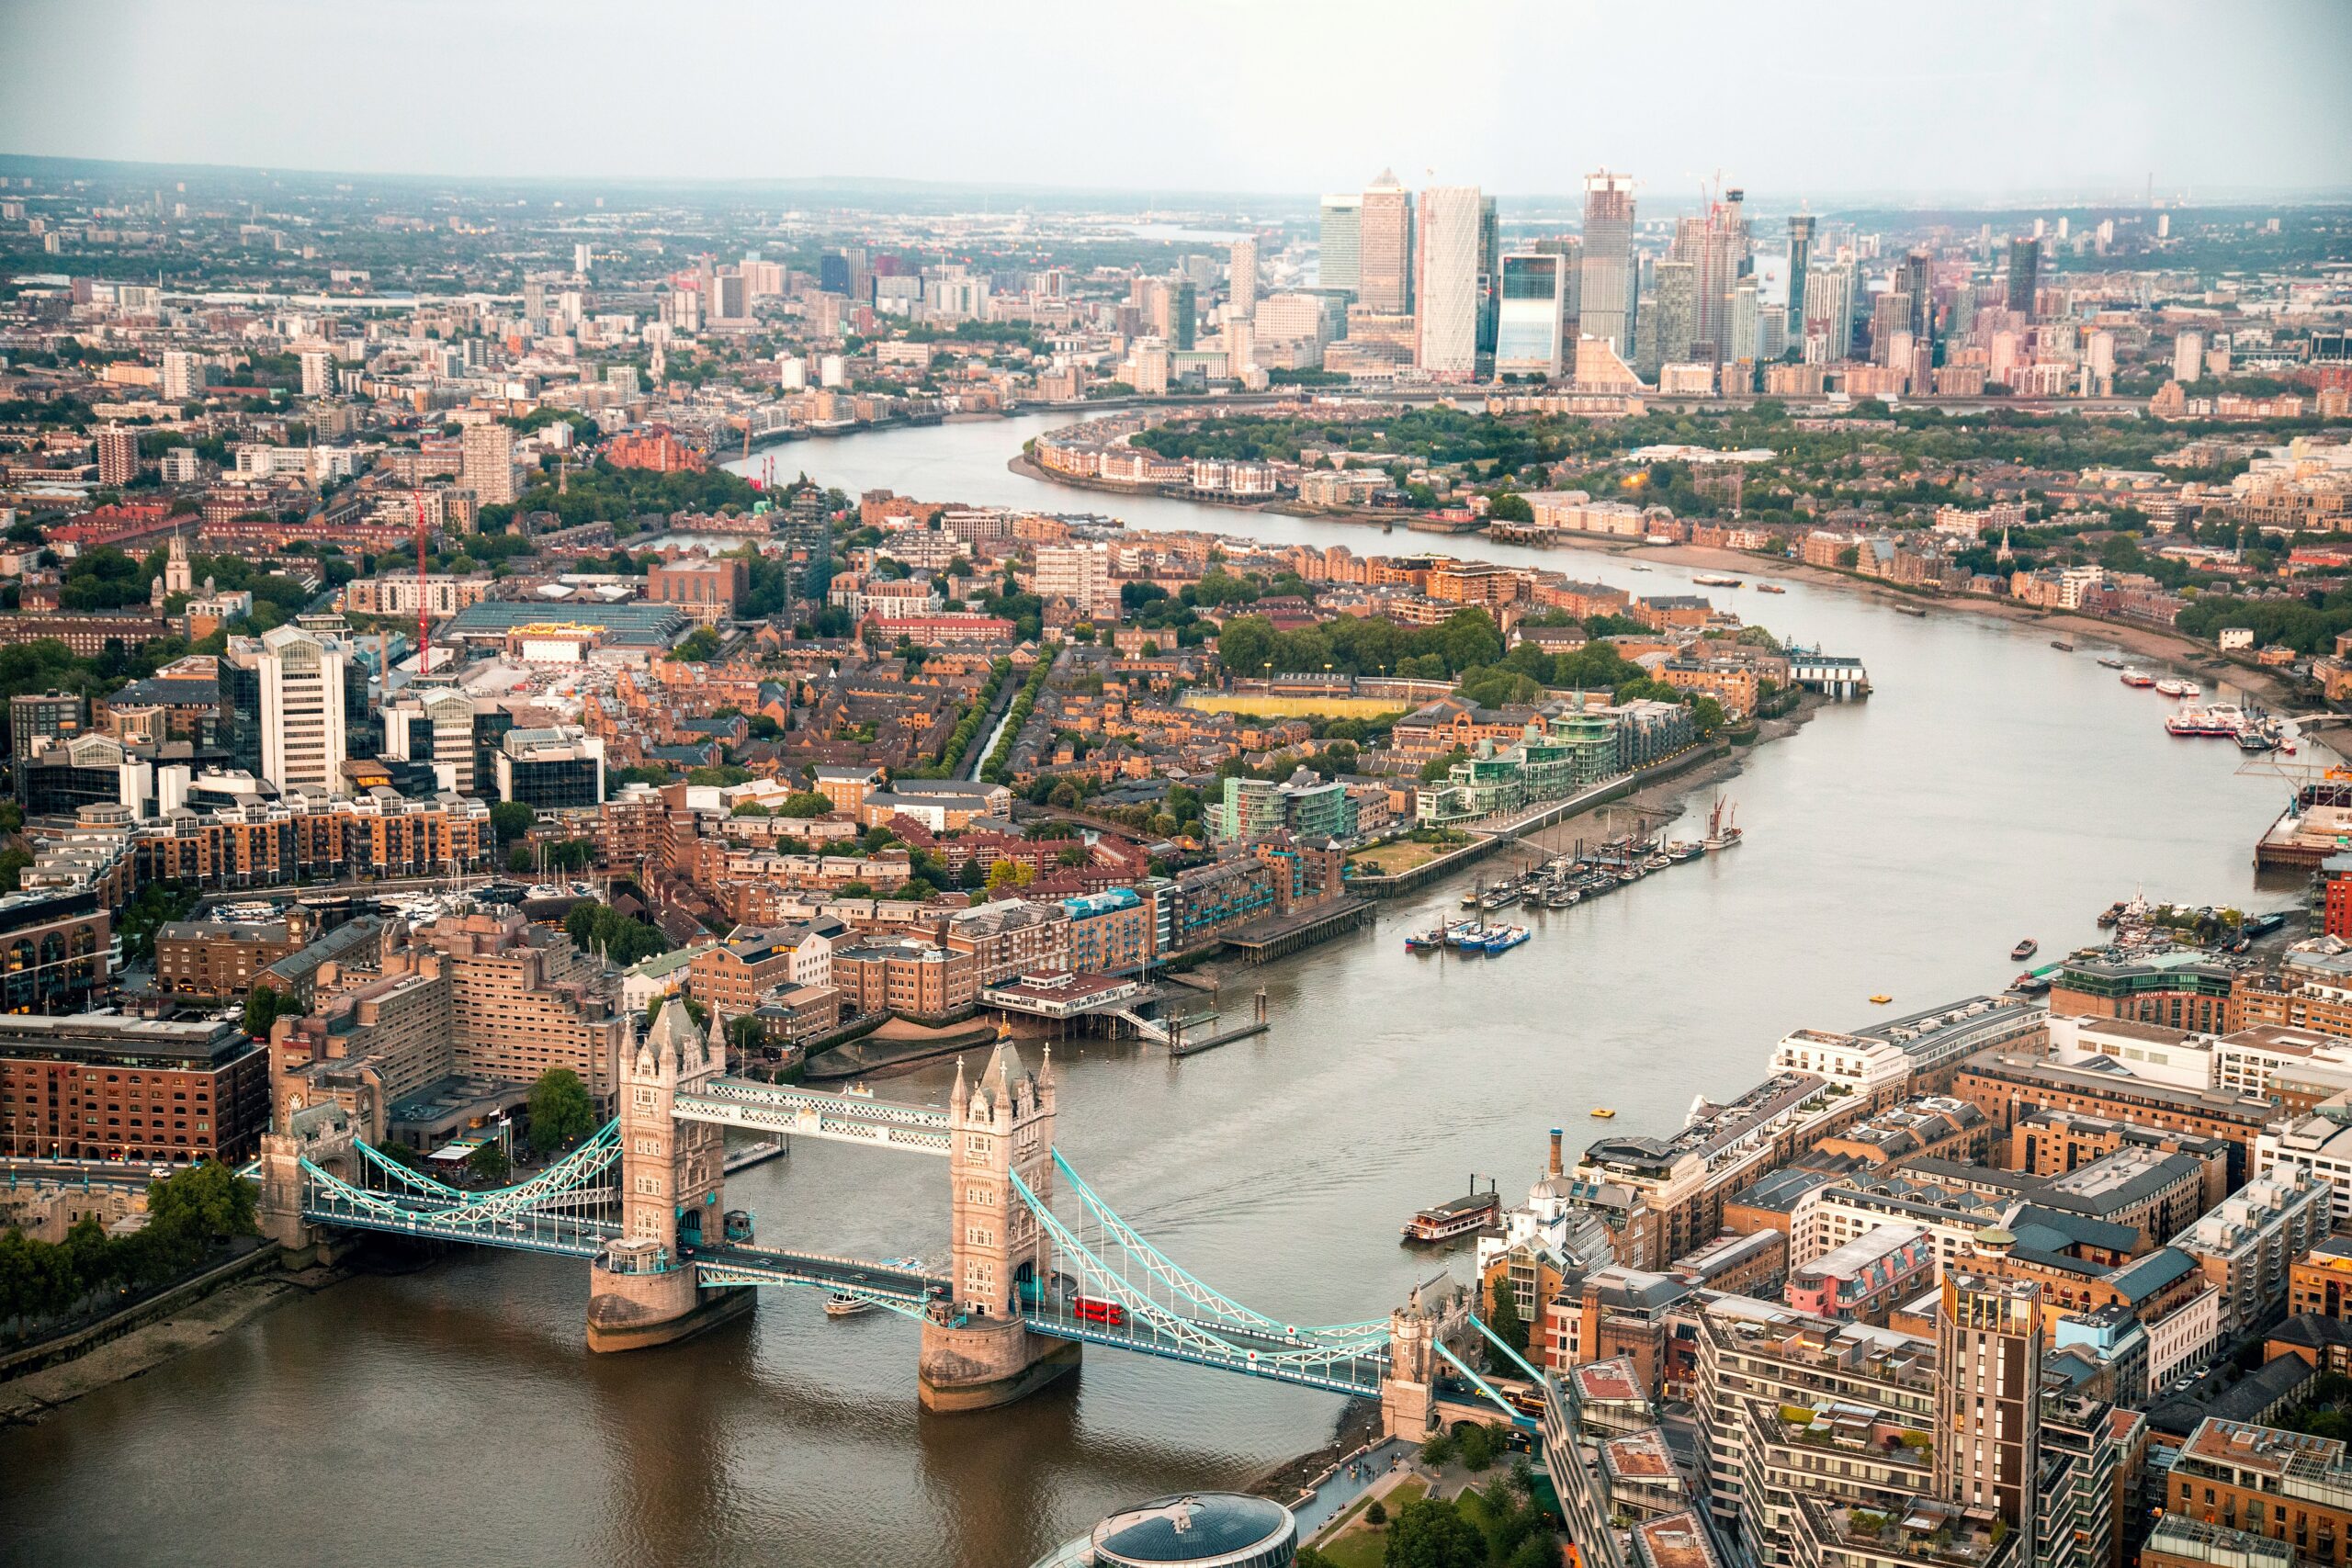 An aerial view of London featuring Tower Bridge and the Shard.